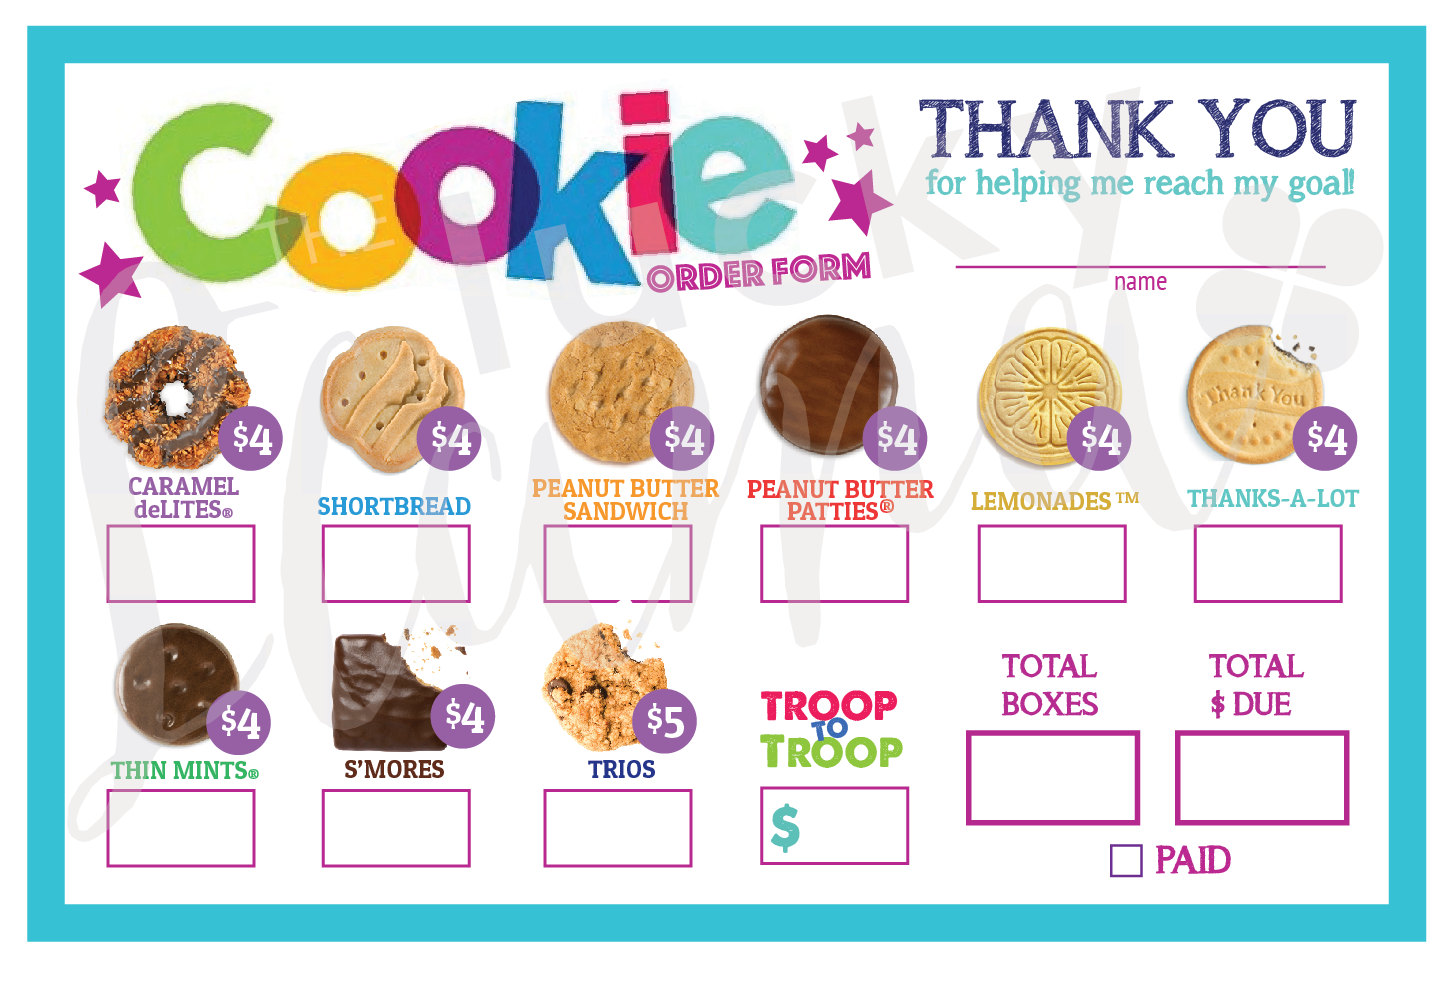 Thank you girl scout cookies